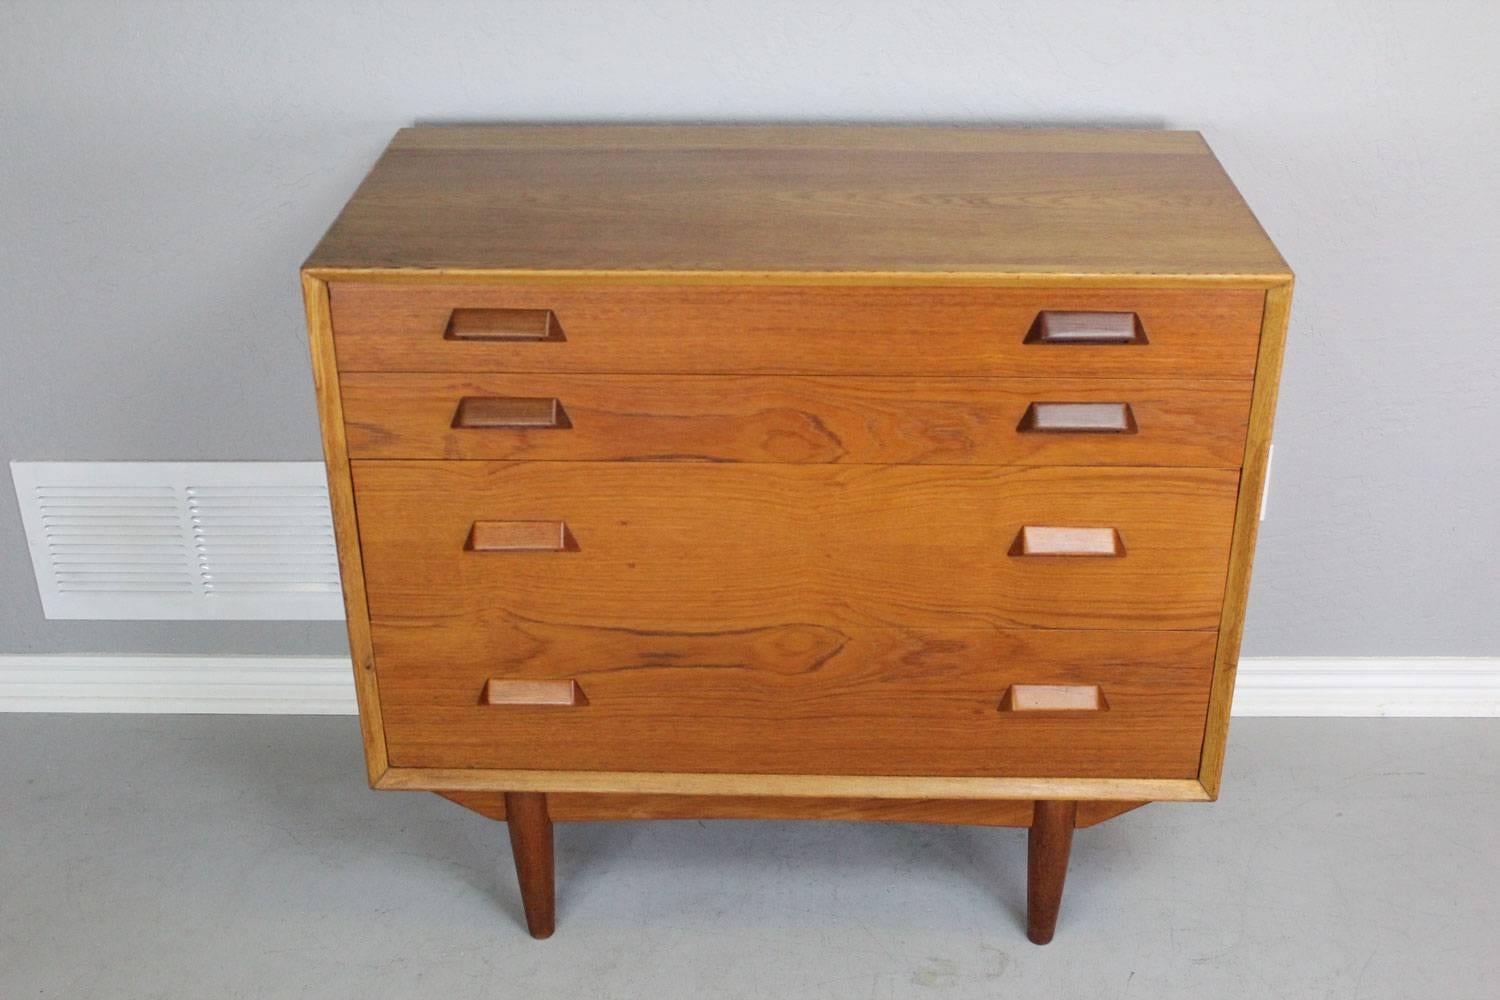 Four-drawer Danish oak and teak chest of drawers with teak trapezoidal style drawer pulls designed by Borge Mogensen. 